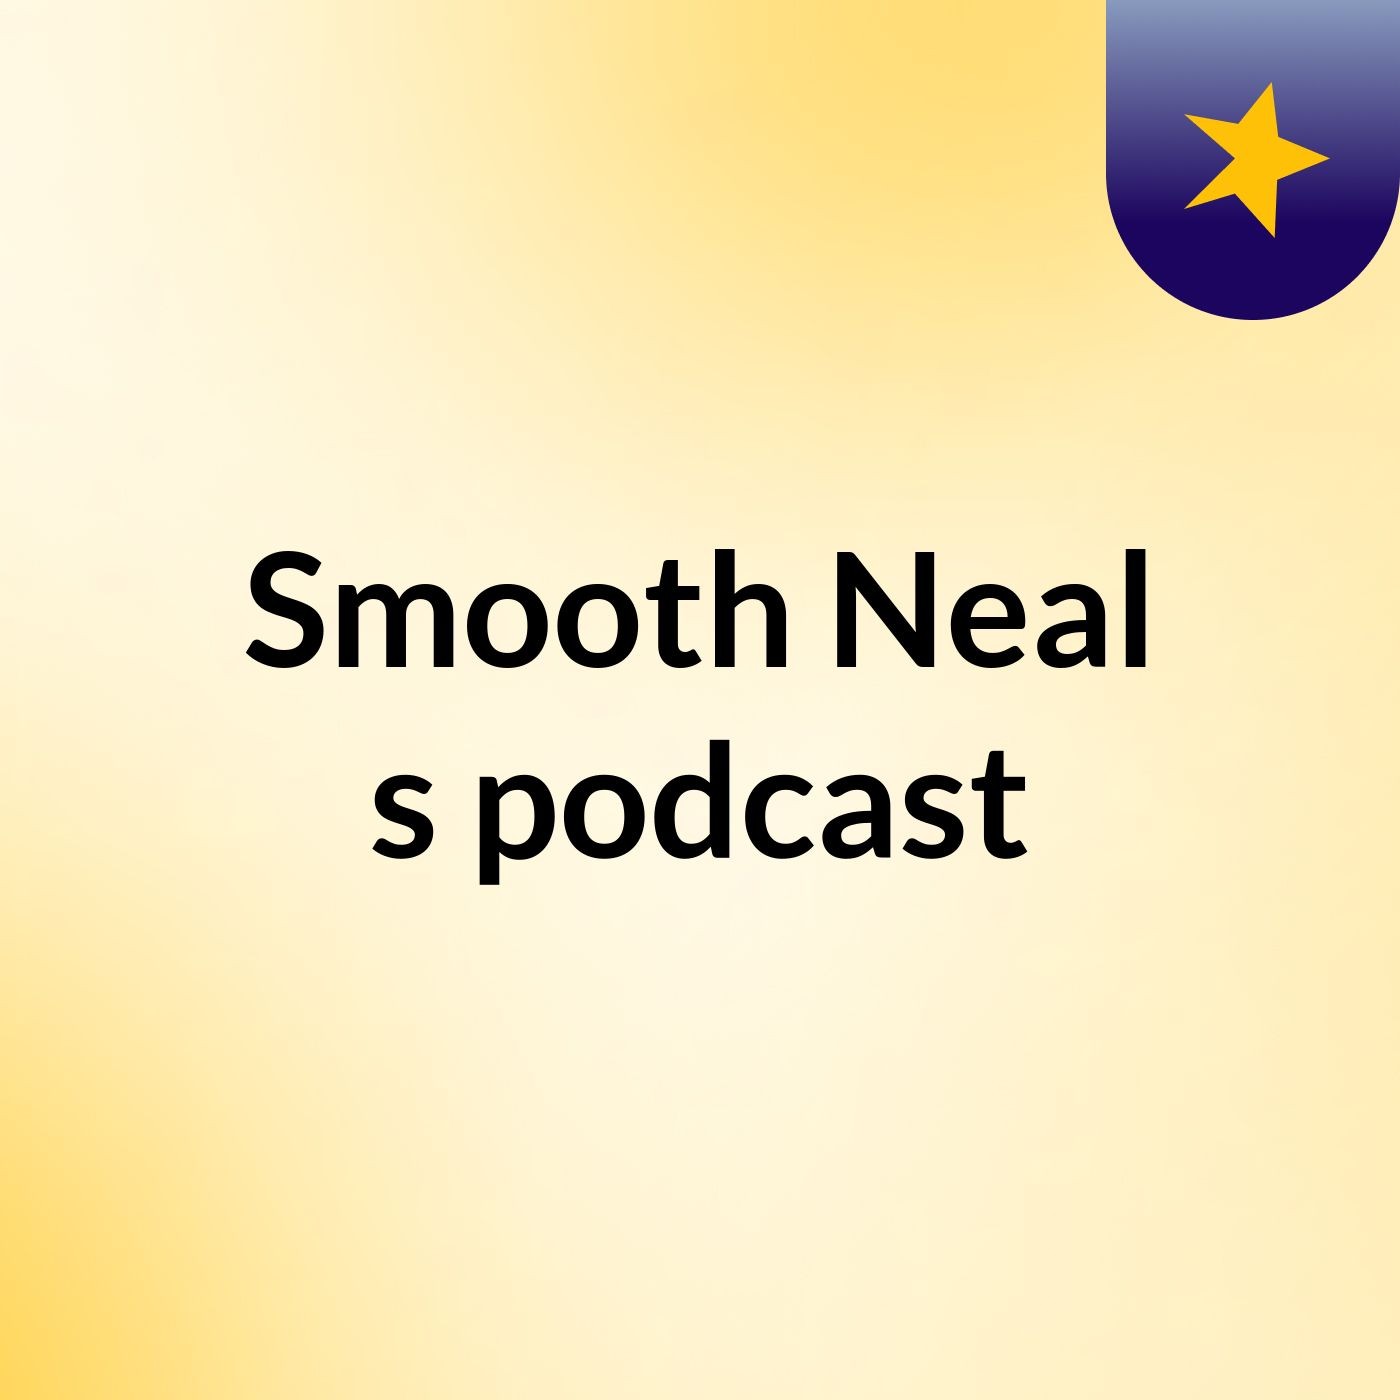 Smooth Neal's podcast